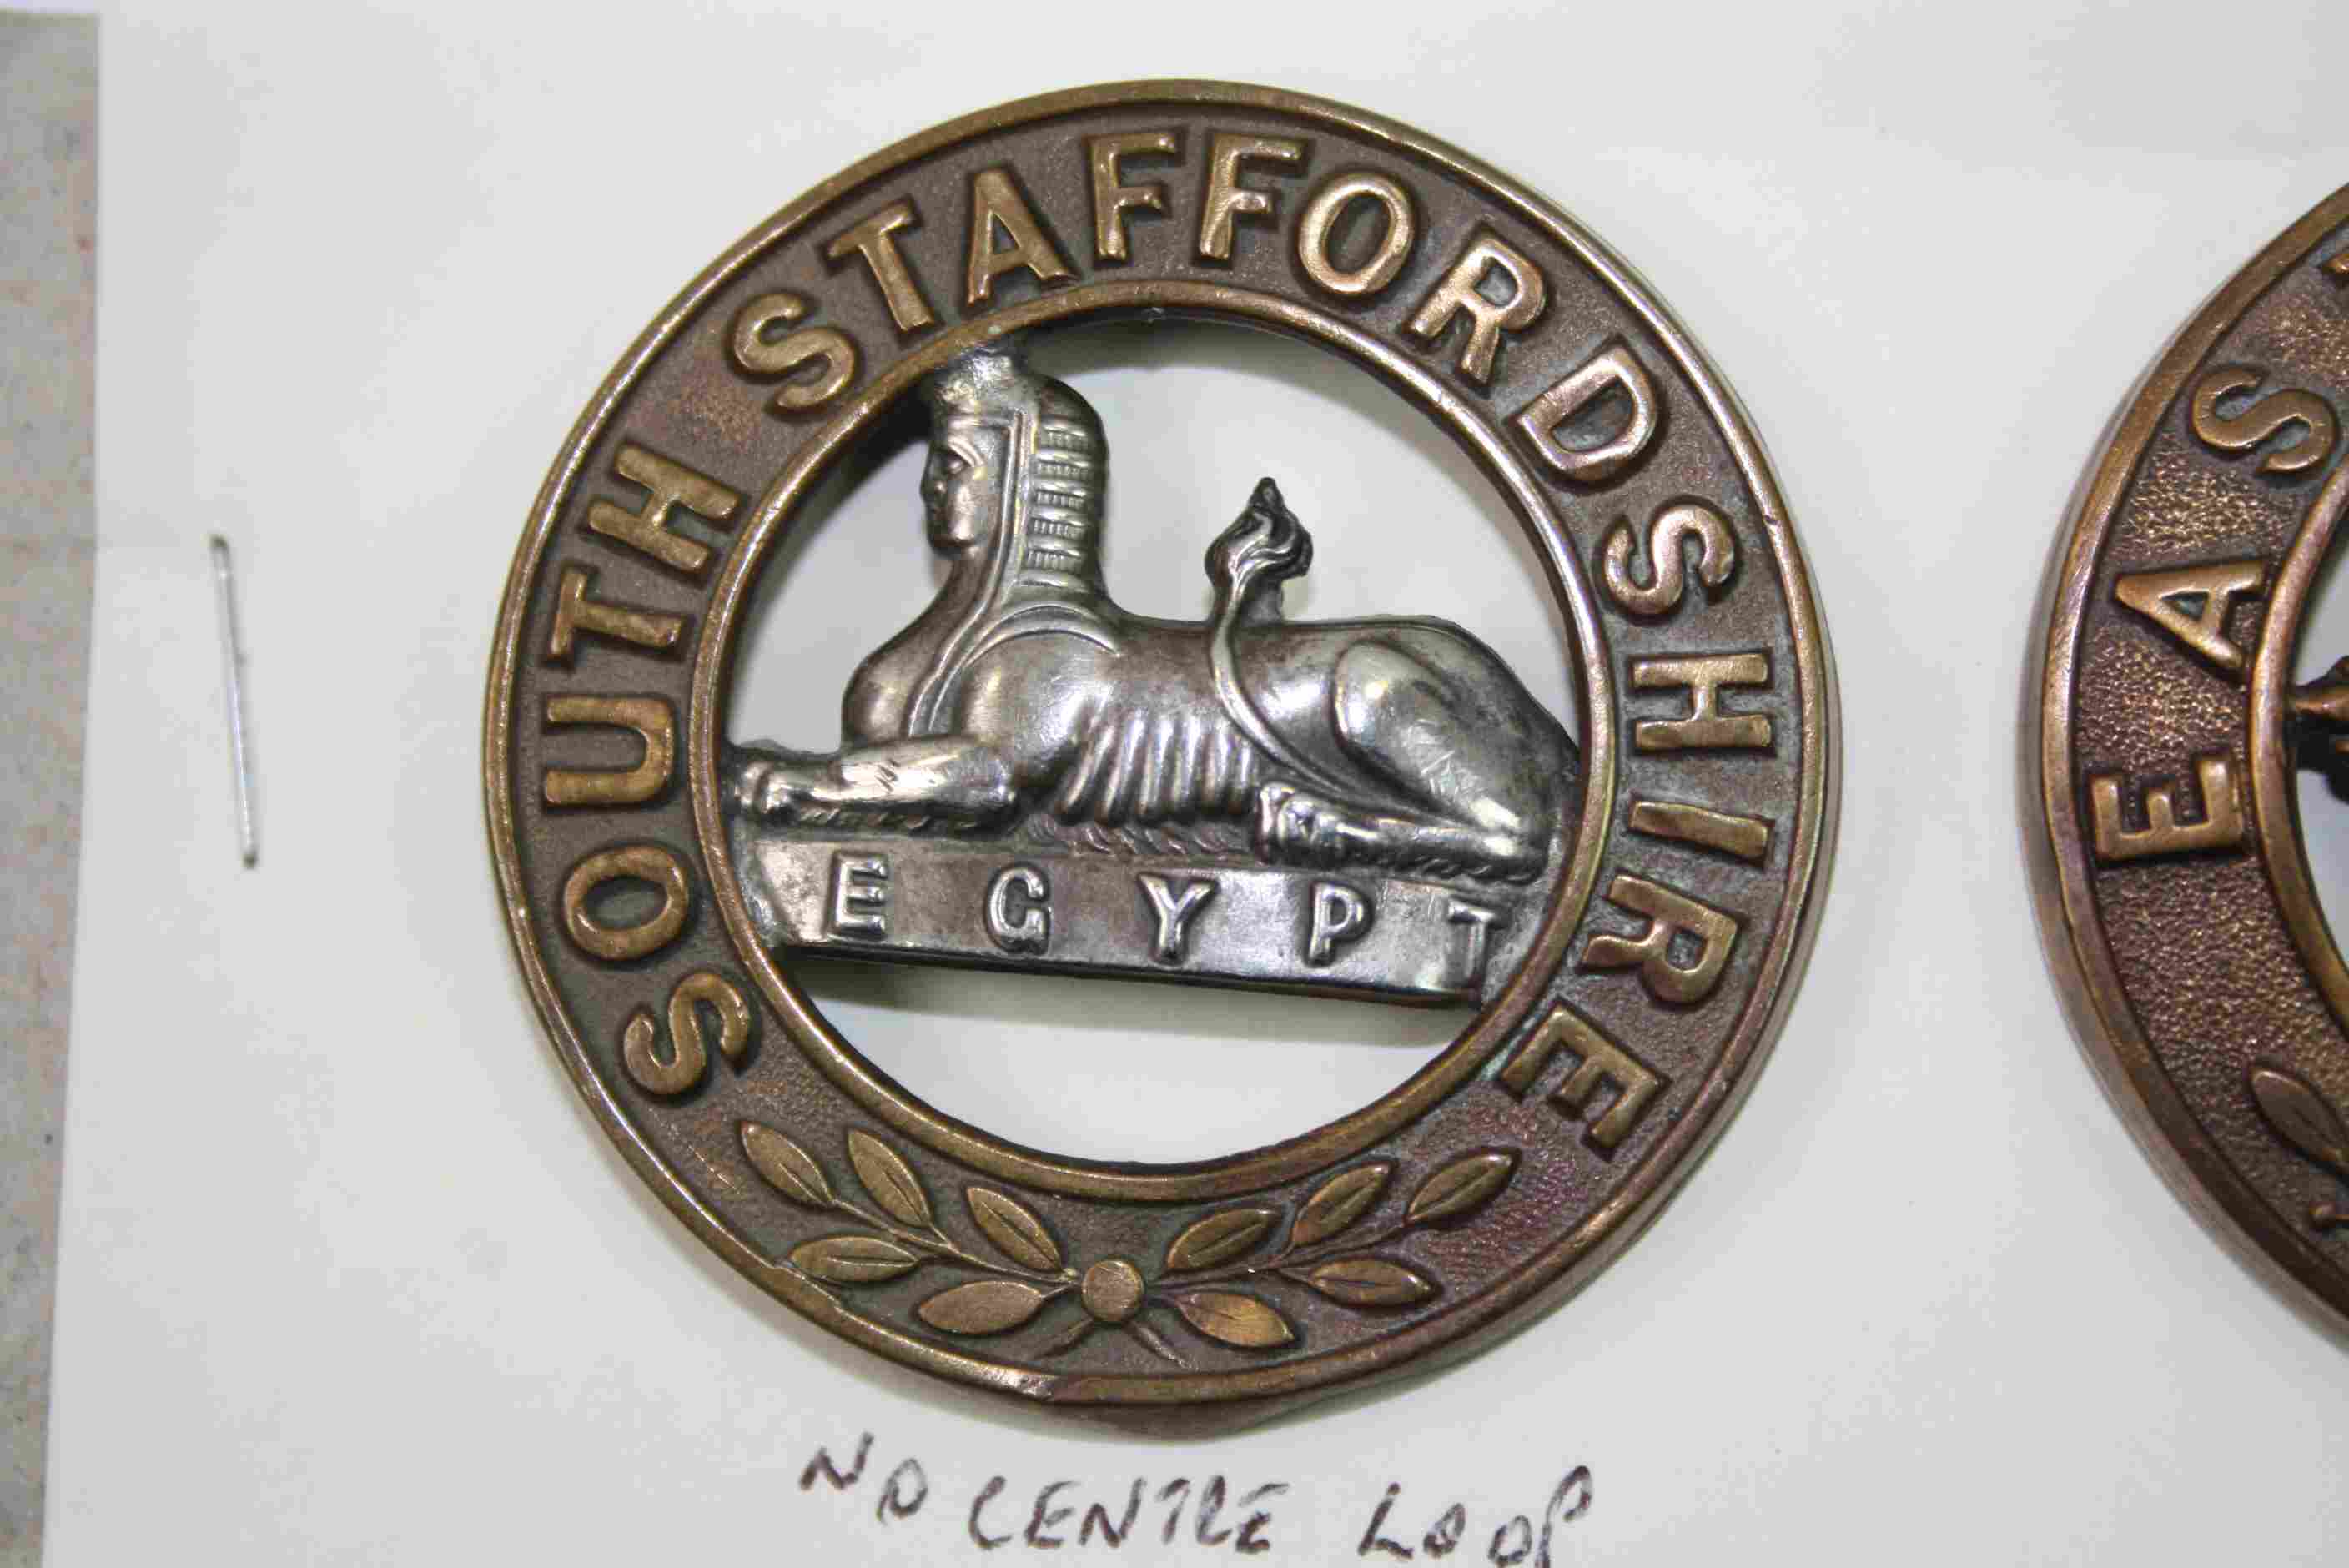 Two Brass Helmet Plate Badges For The South Staffordshire And The East Surrey Regiments. - Image 3 of 4